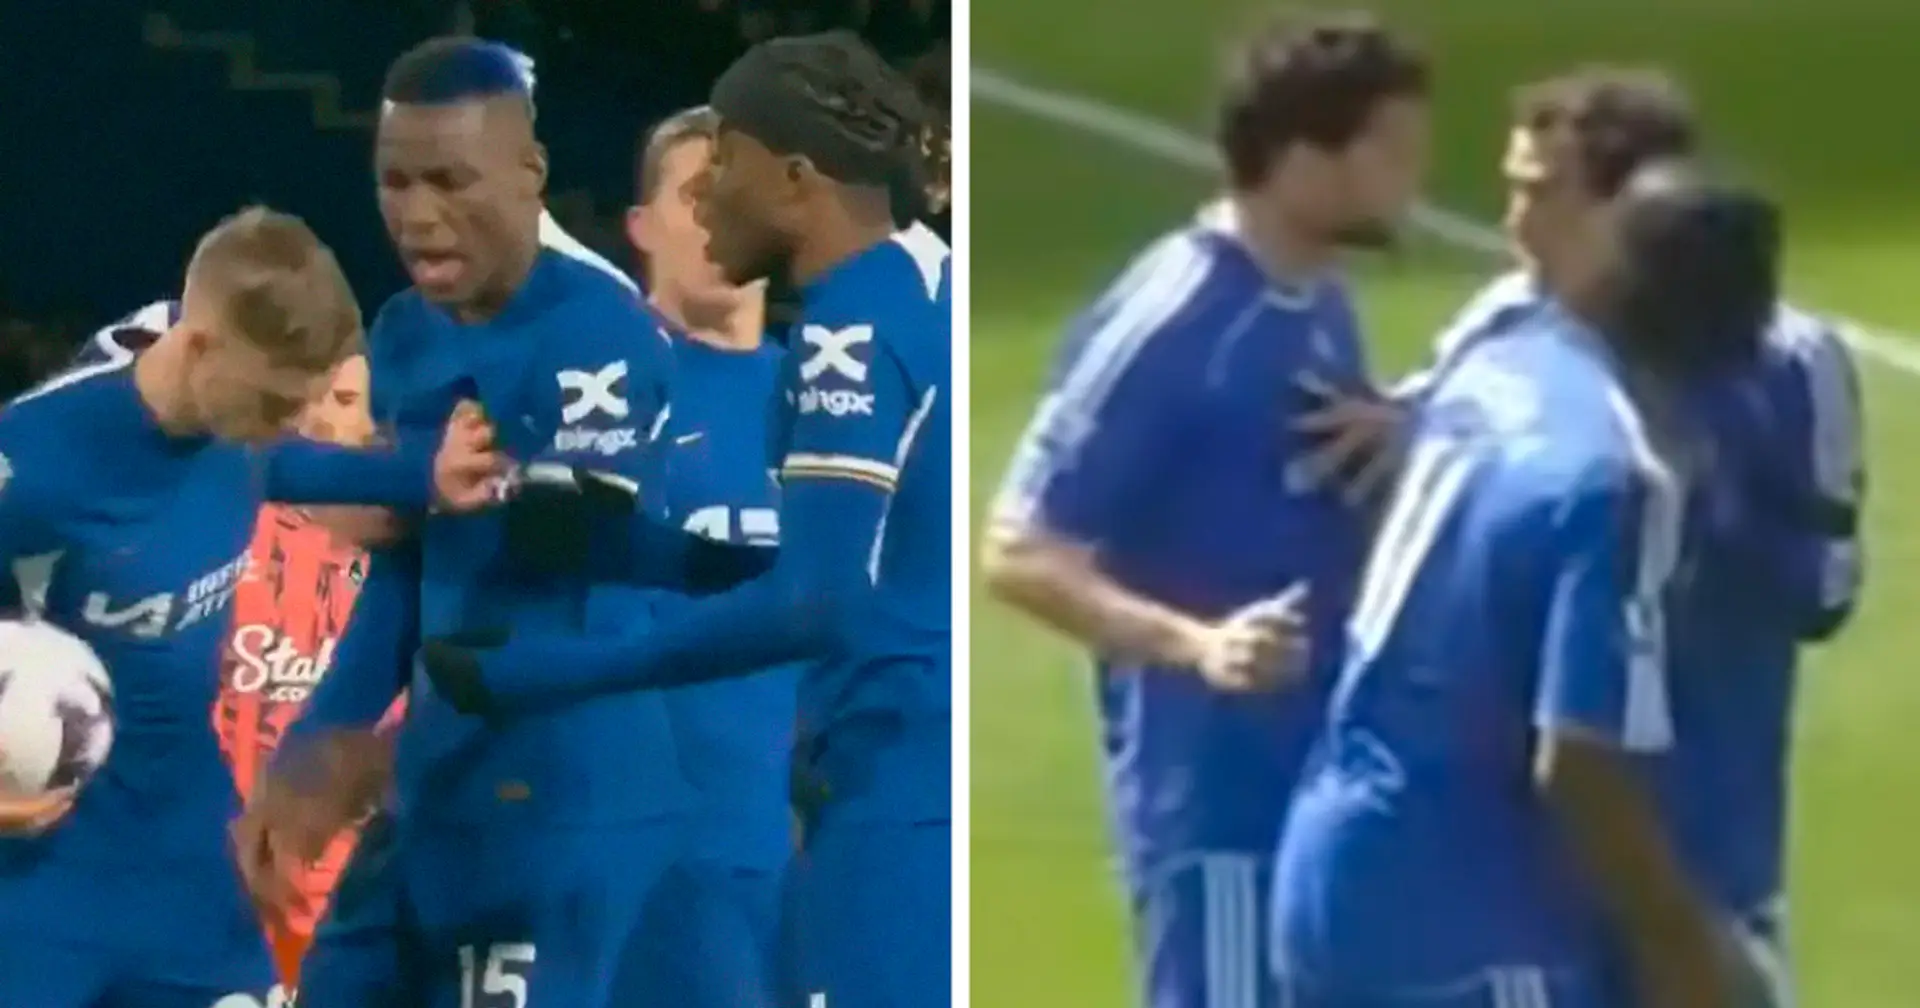 It's not the first time Chelsea players fight over who will take the penalty - it also happened in 2008